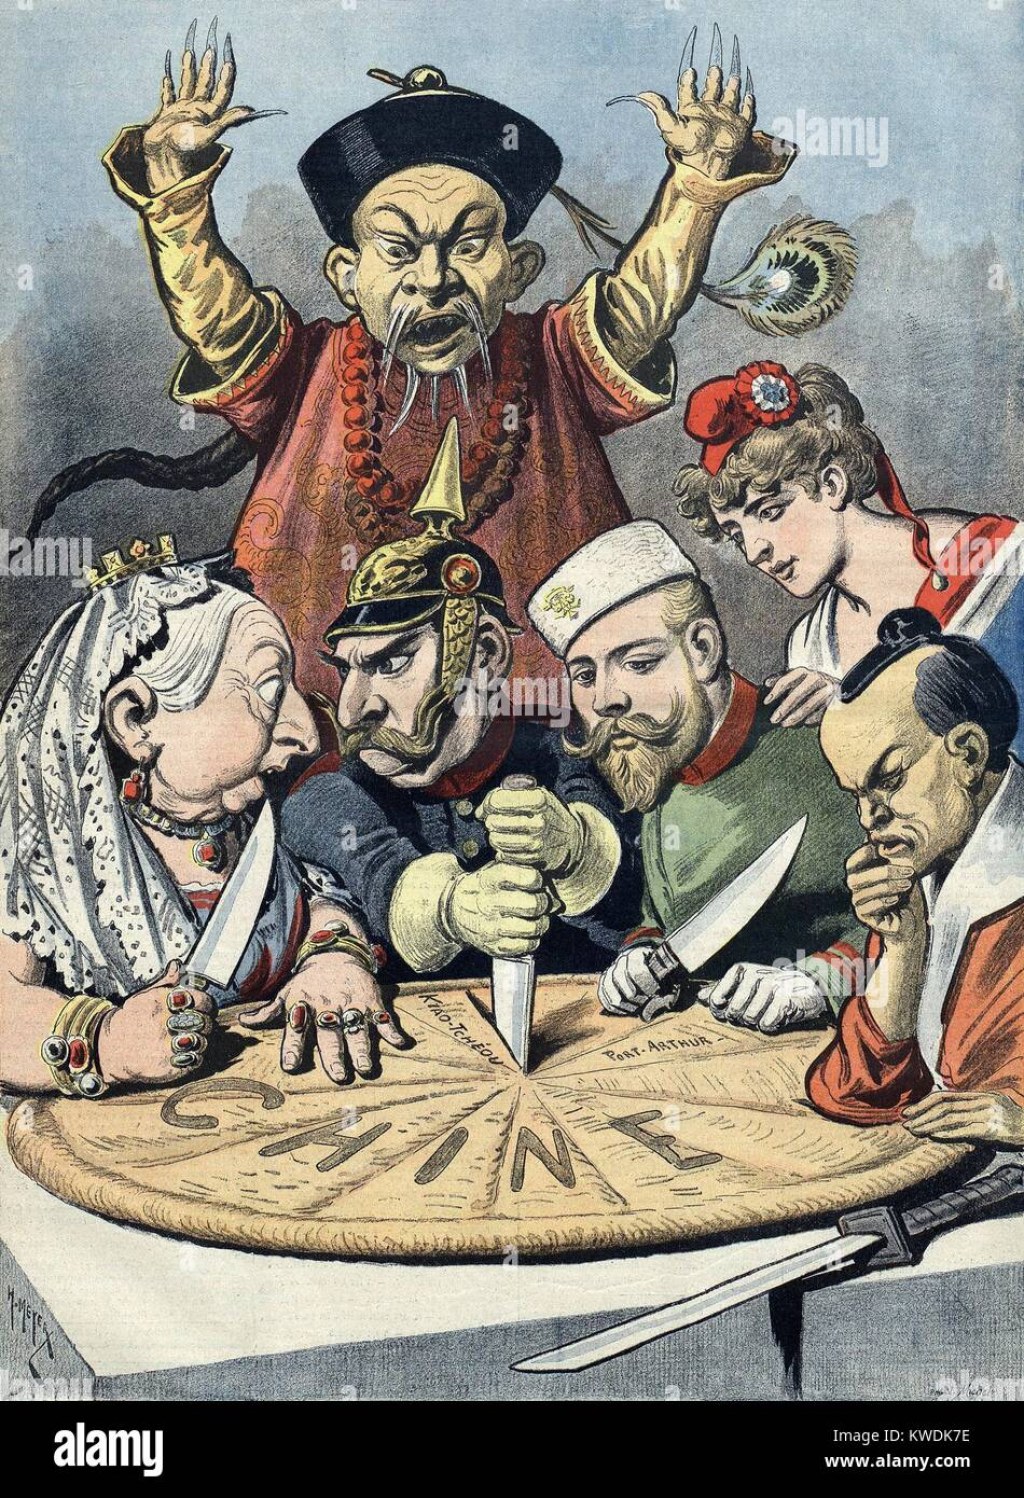 french political cartoon shows europeans carving up china